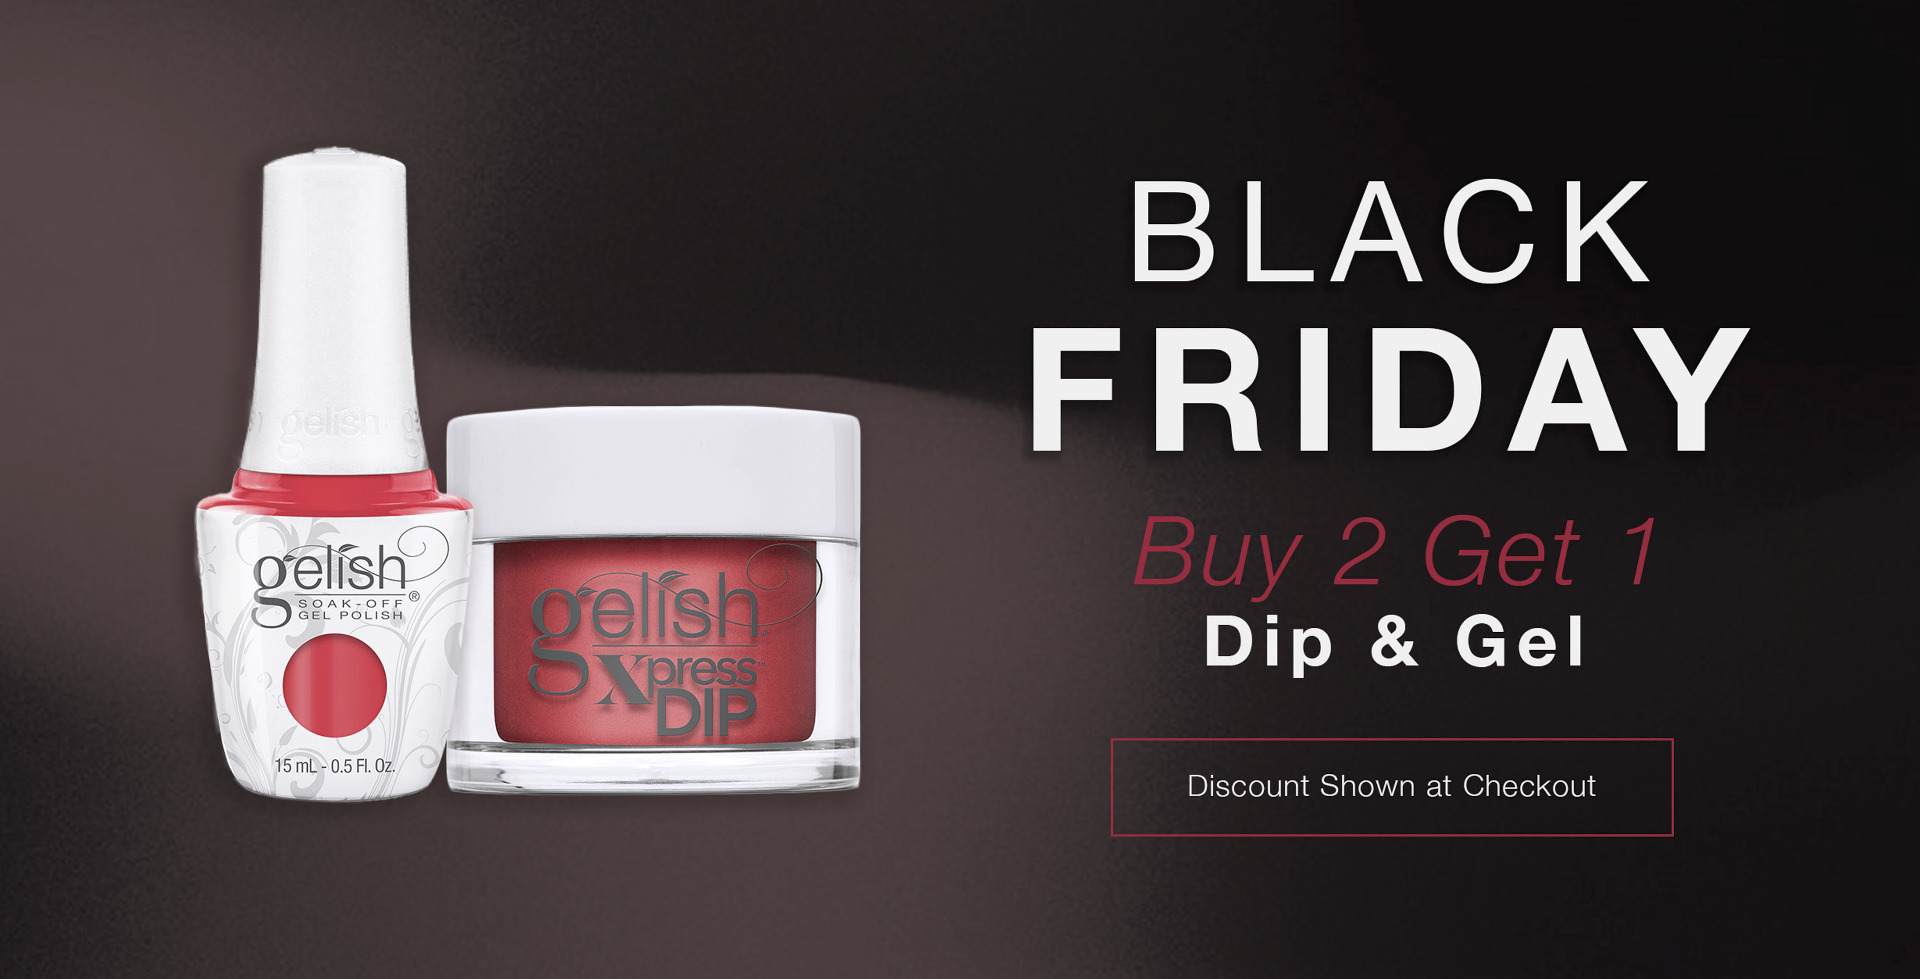 NTS Black Friday Deals - Buy 2 Get 1 on Dip & Gel and Check out our savings on select items!